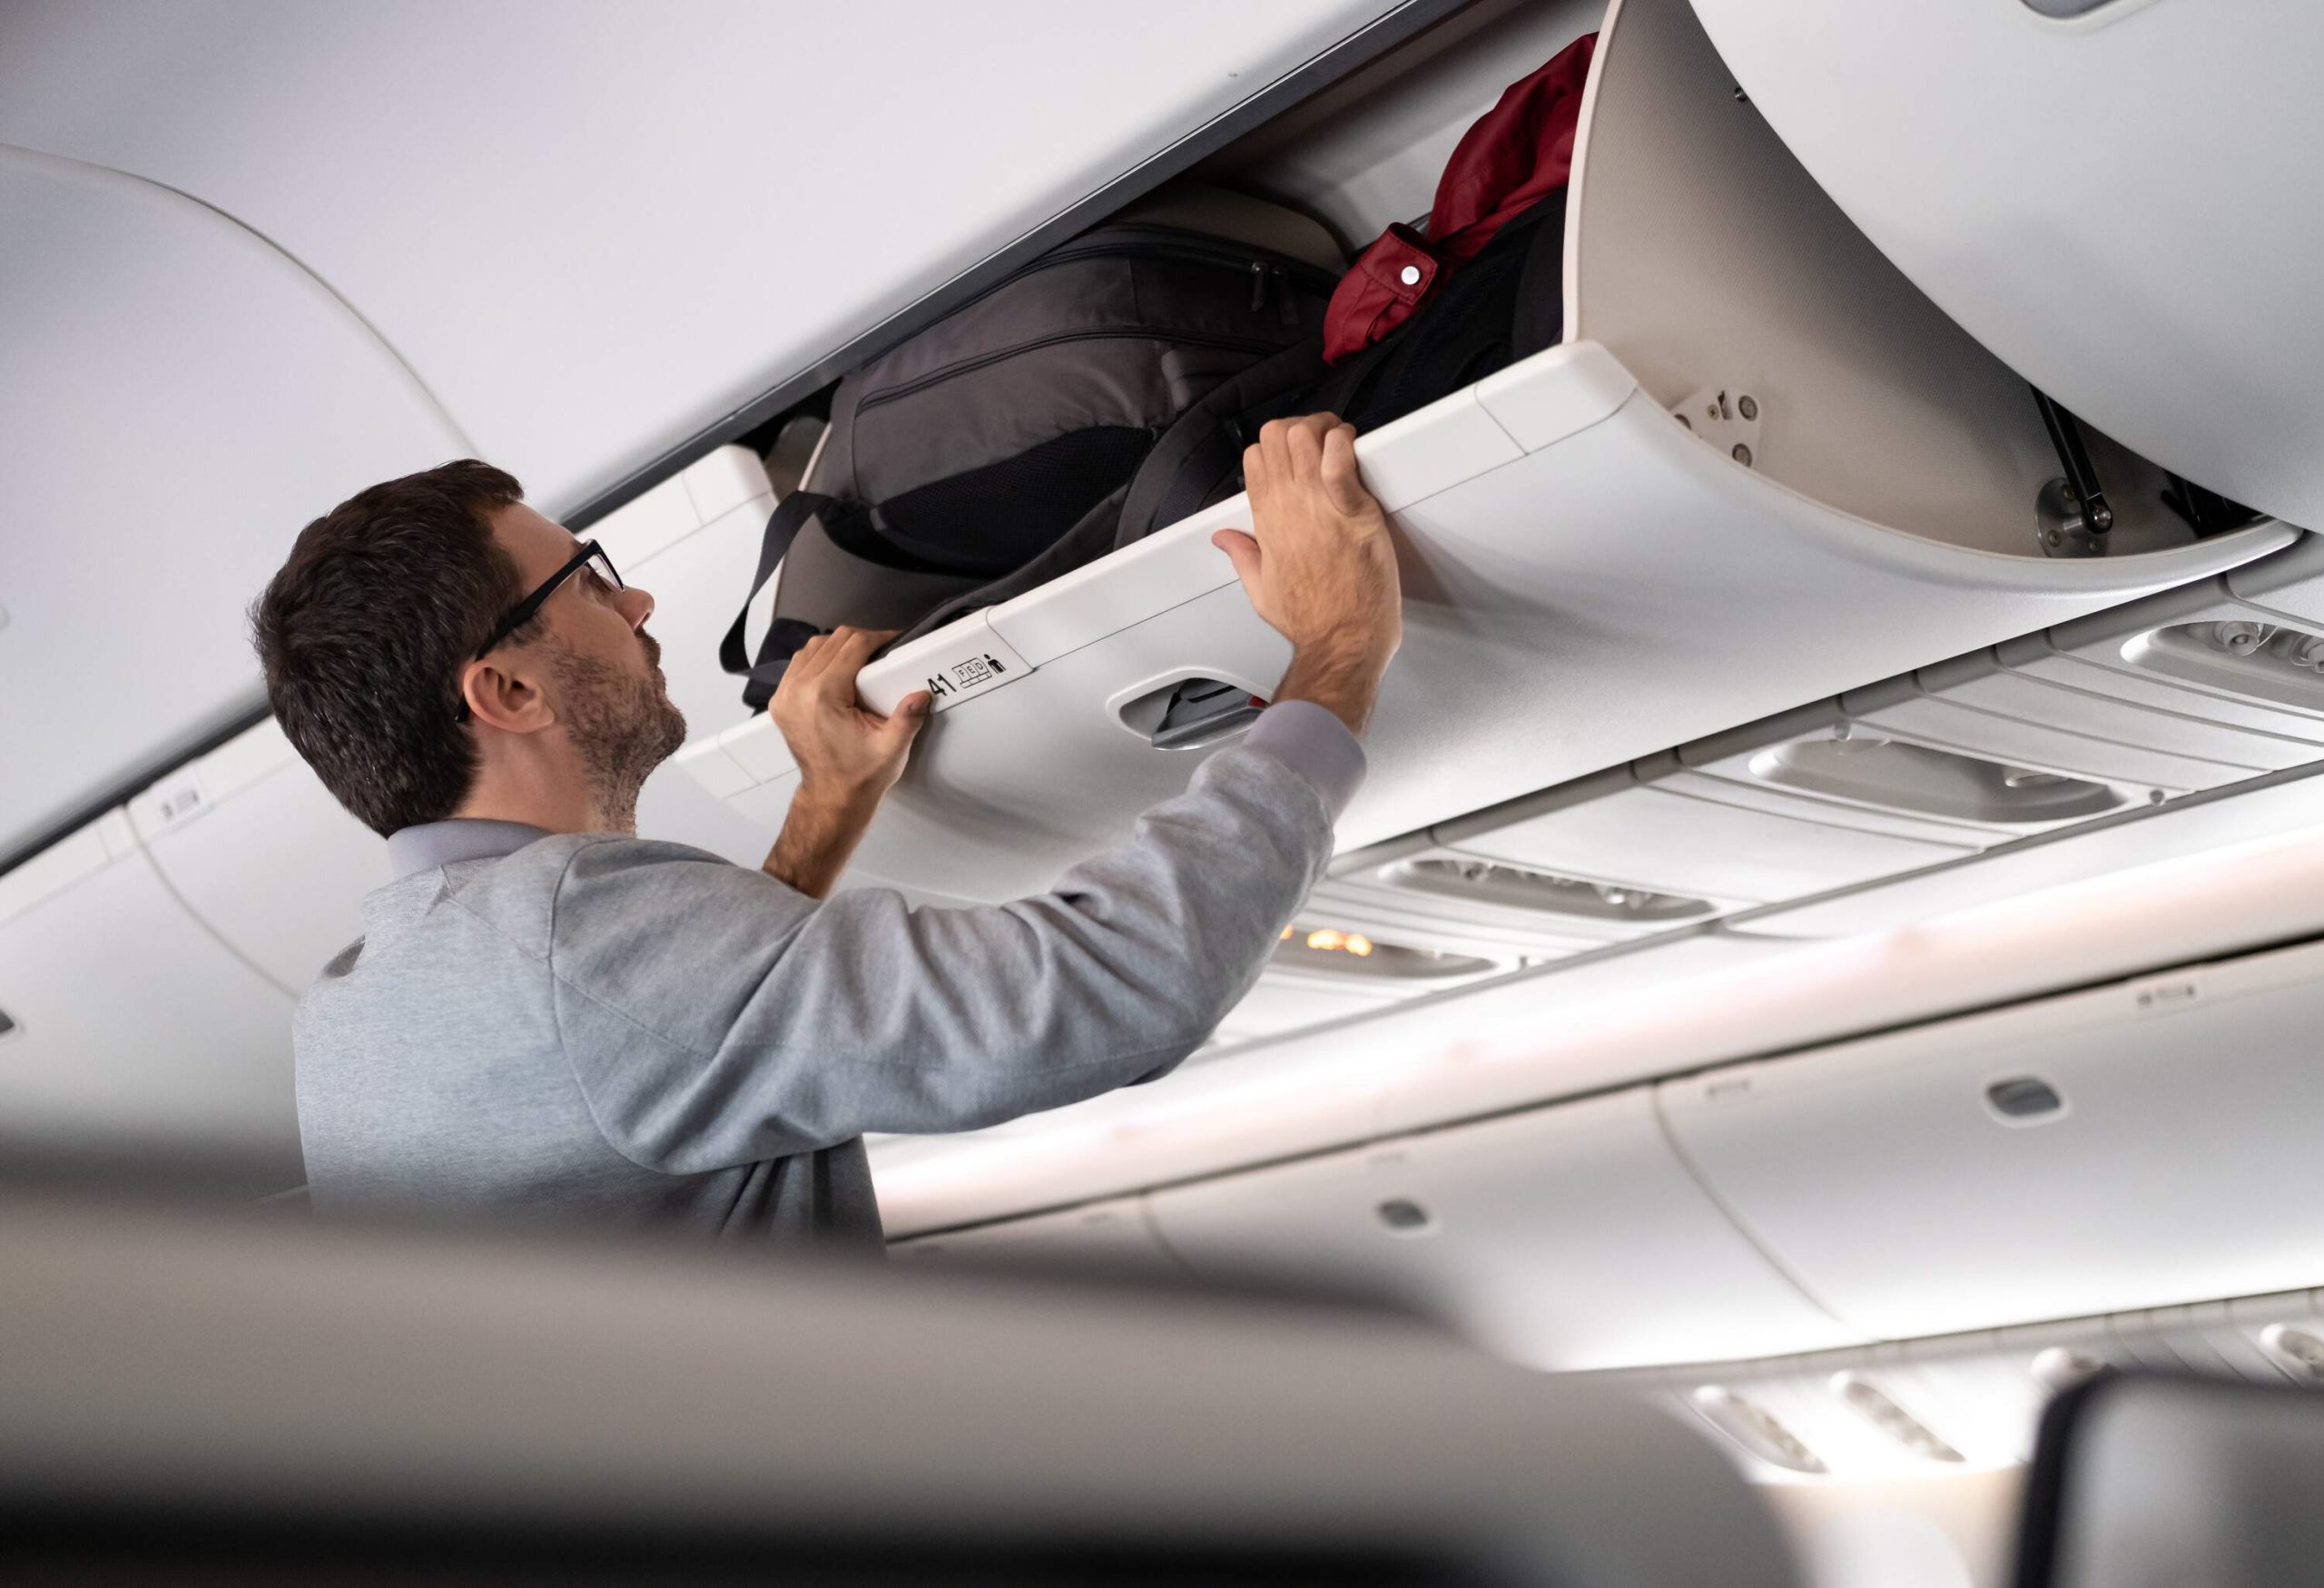 A man loading and securing his bags in the overhead compartment of the airplane.